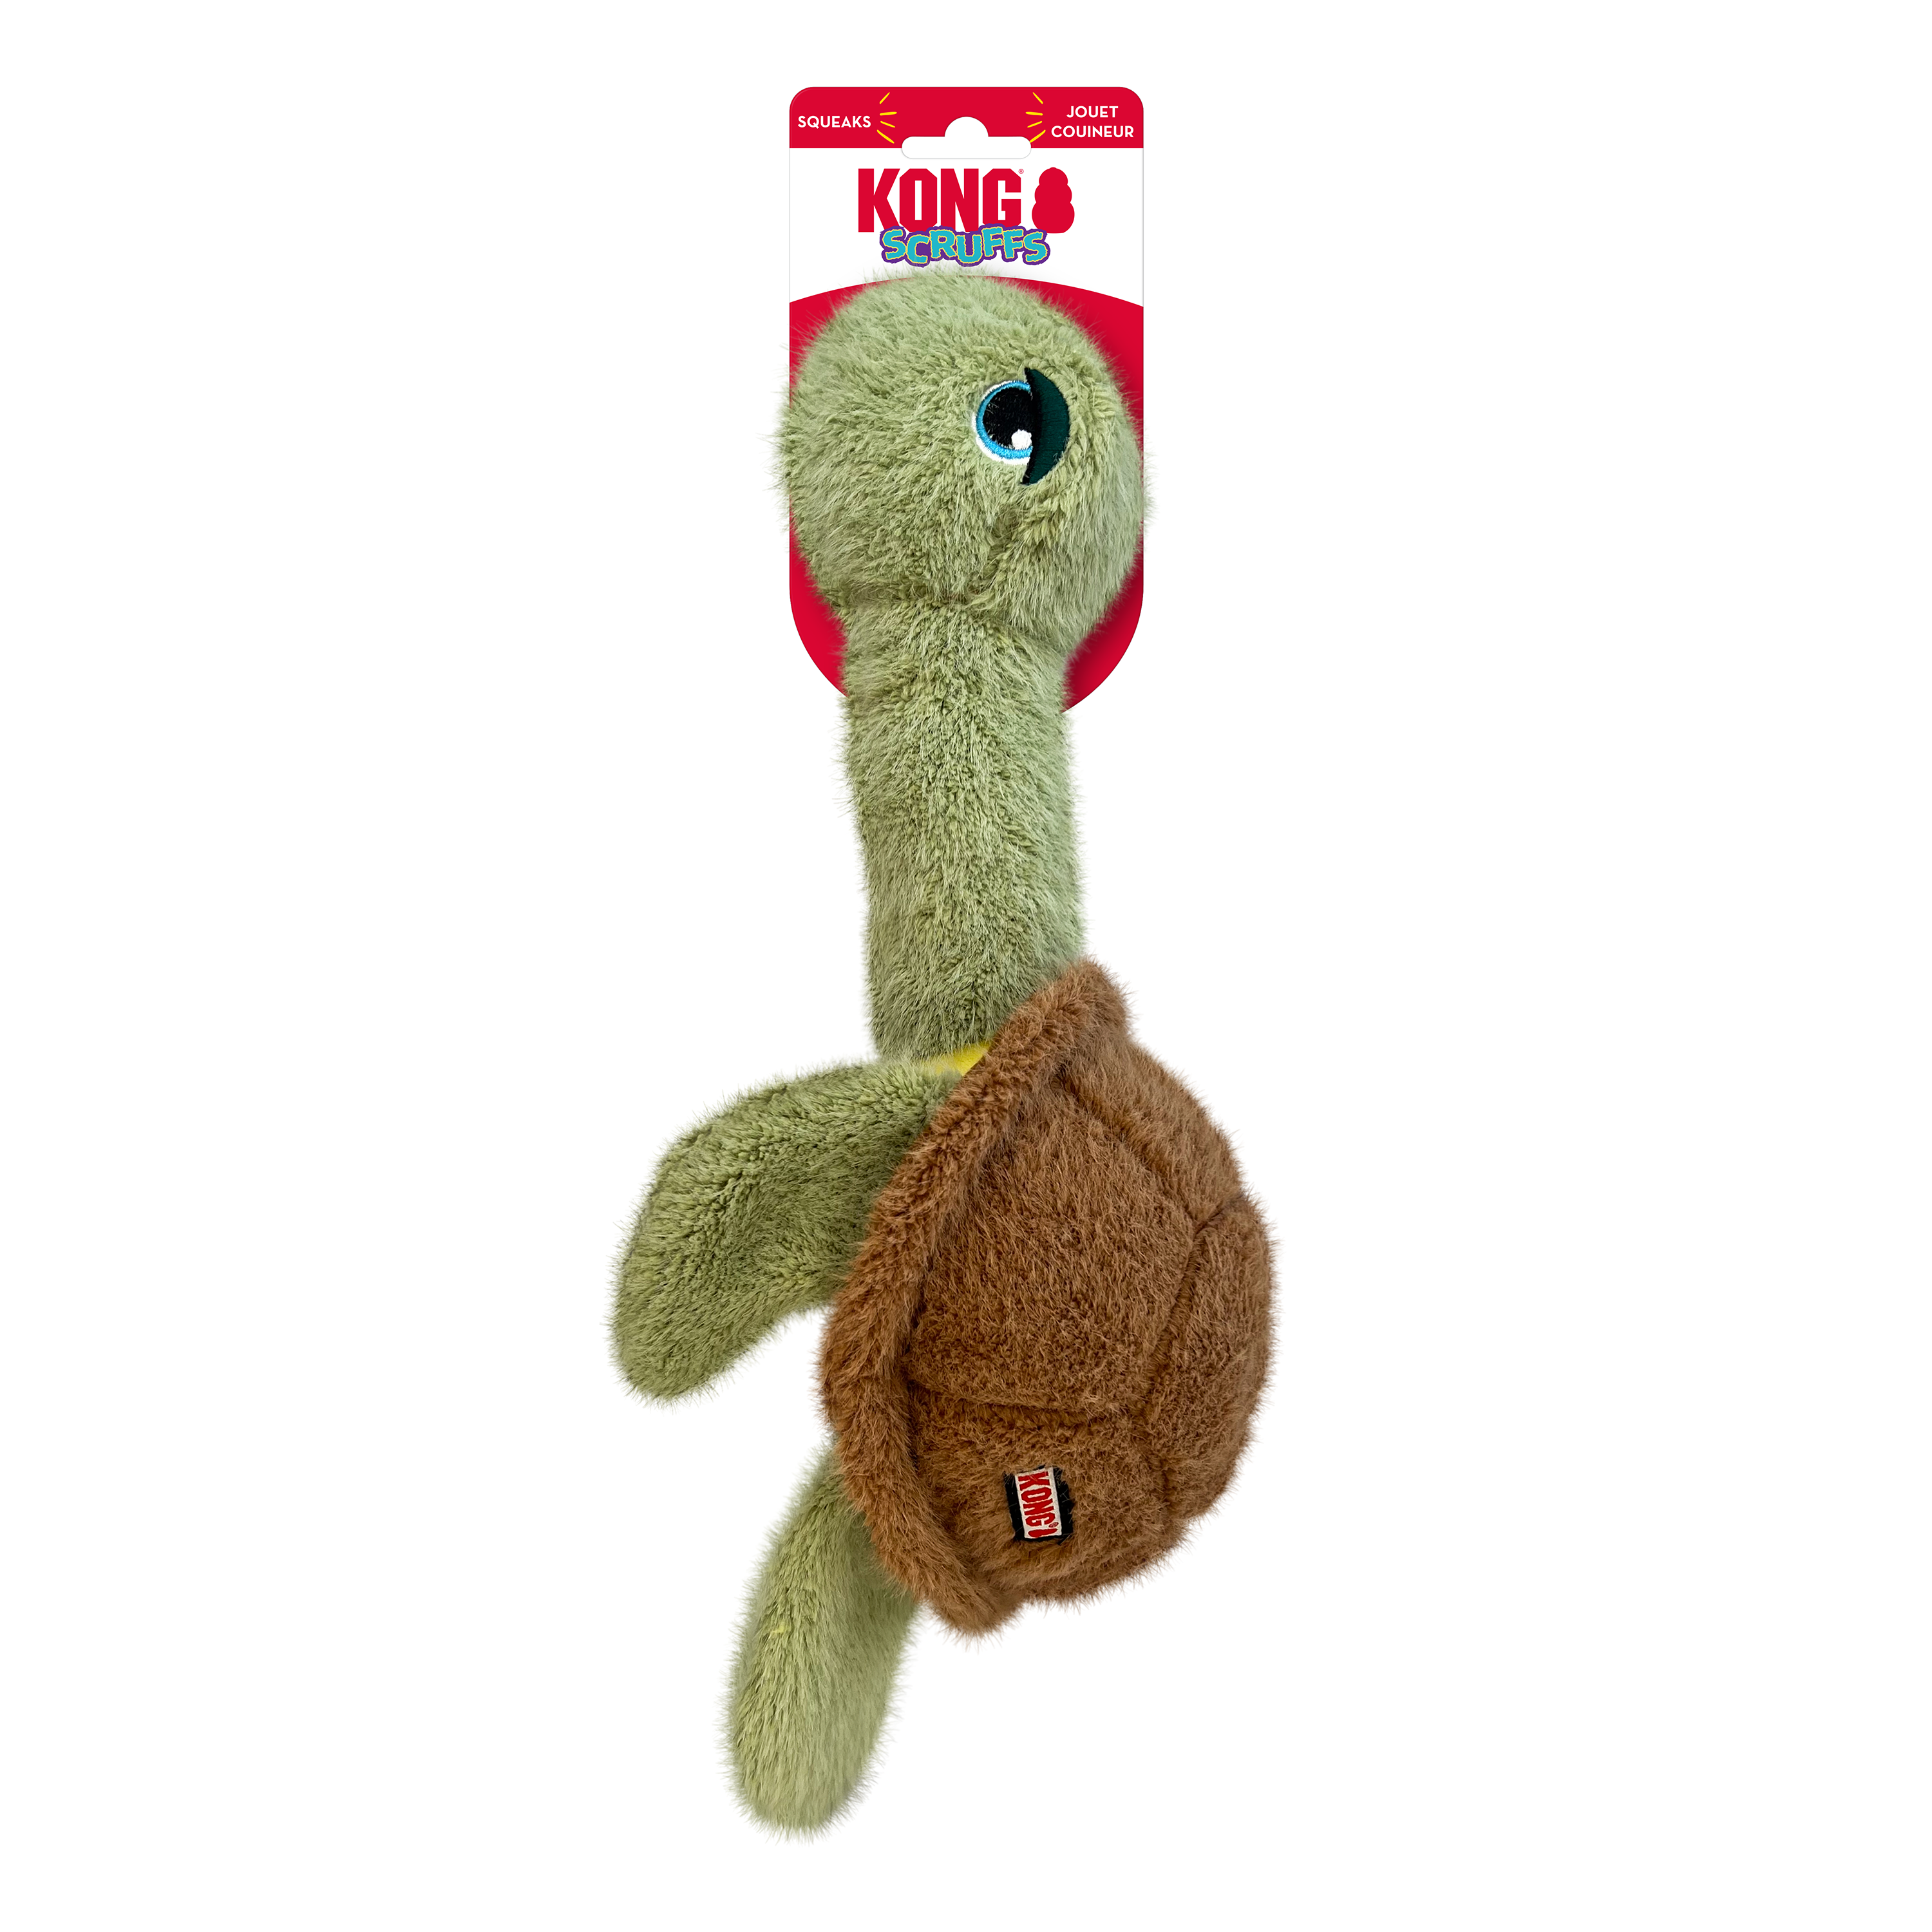 Scruffs Turtle onpack product image